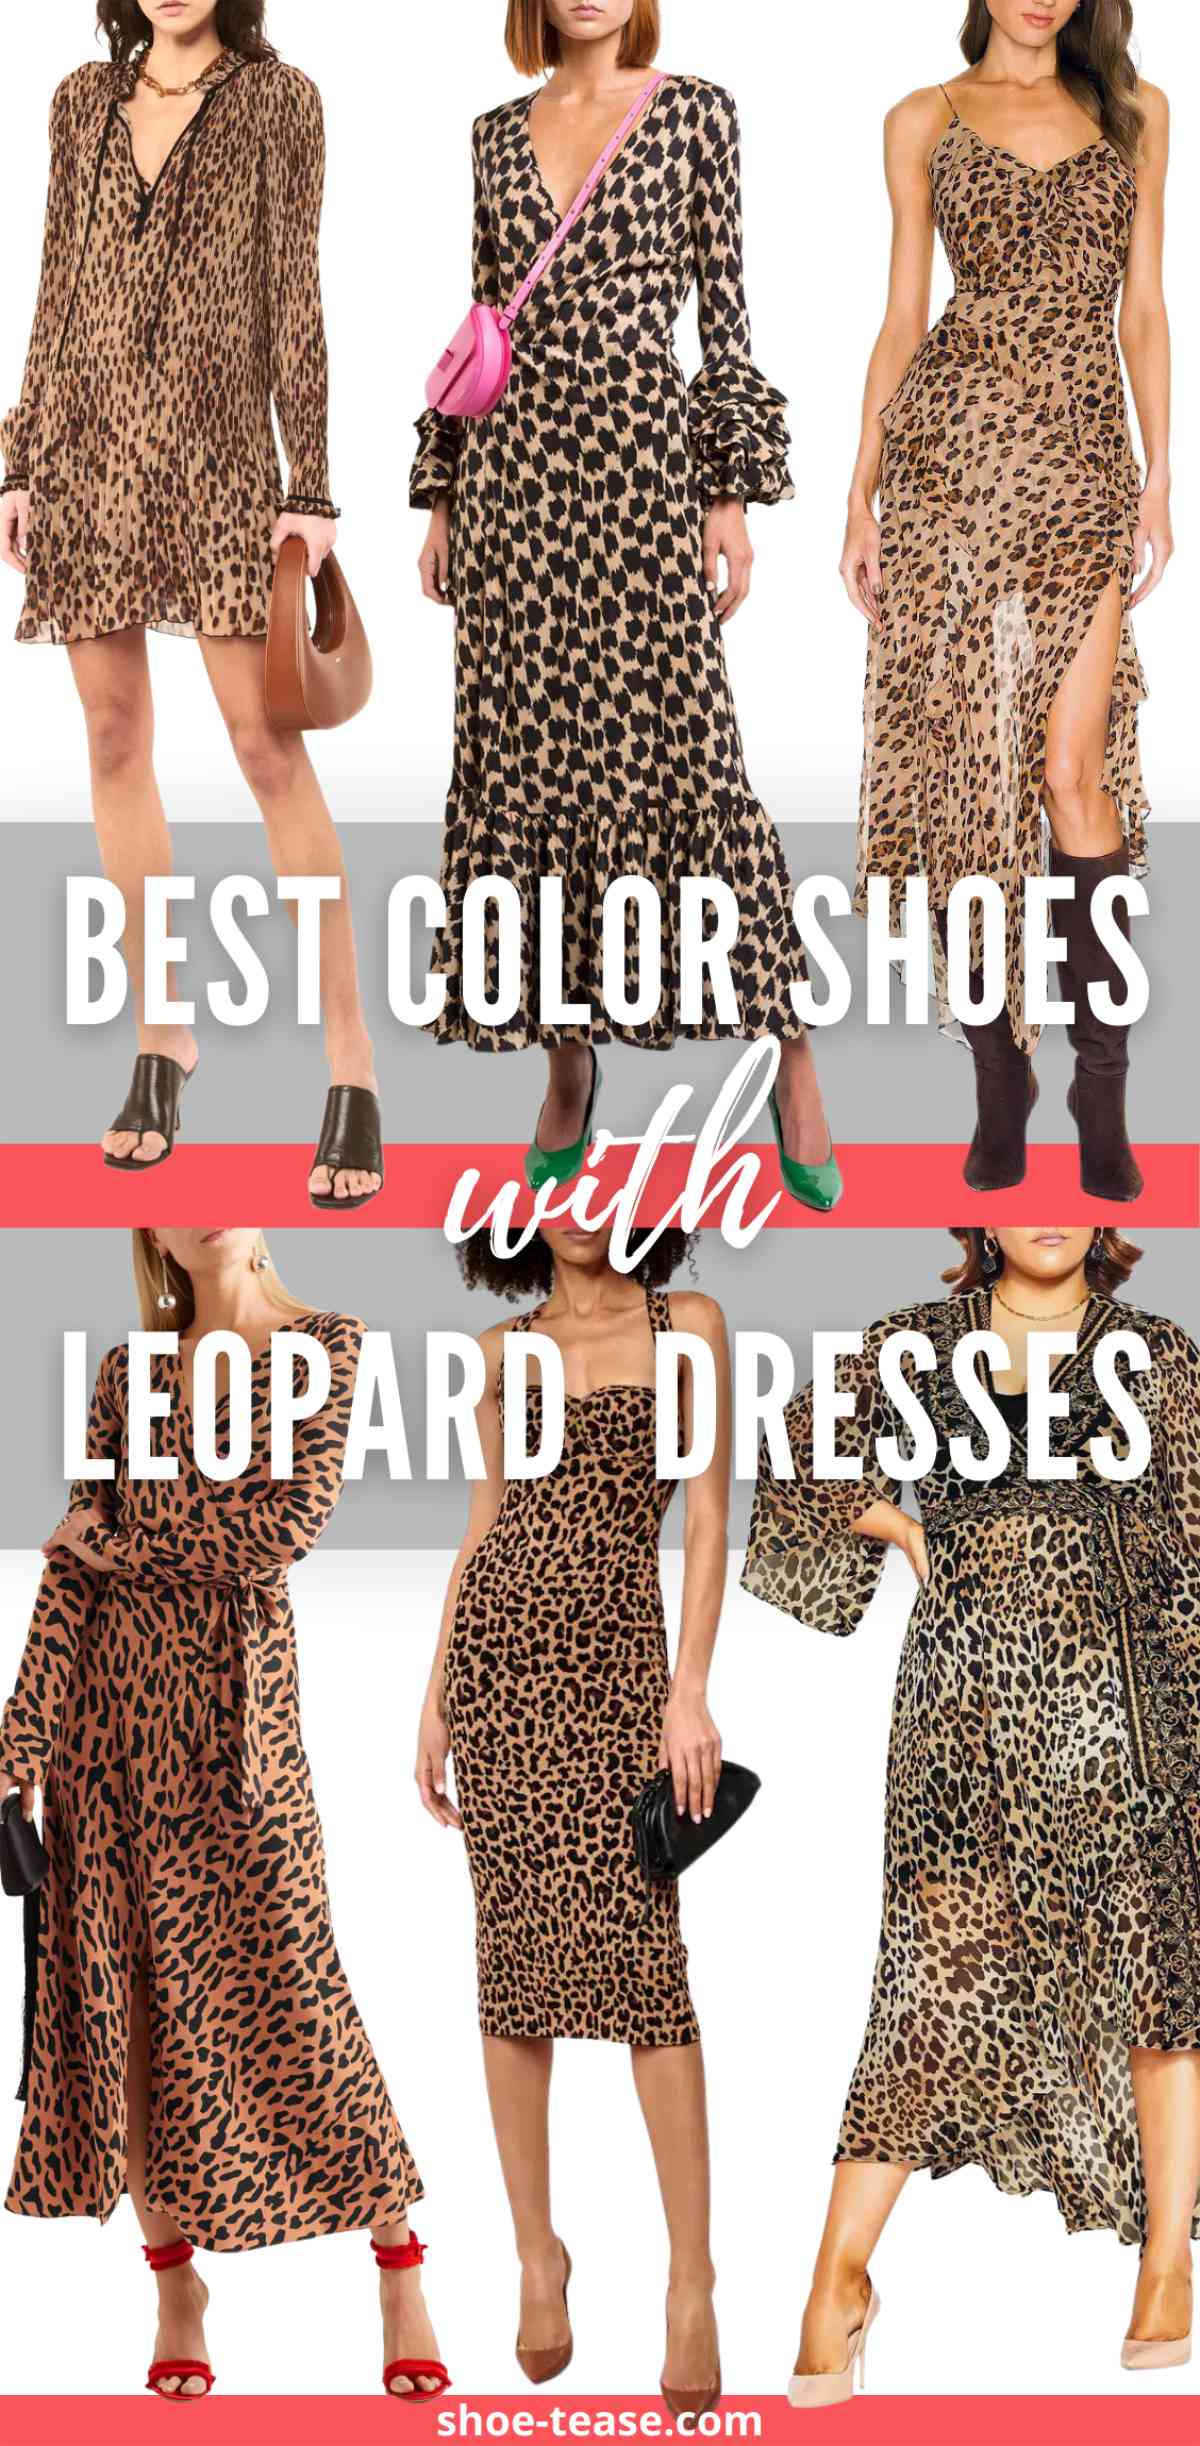 Text reading best color shoes with leopard dresses over 6 women with leopard dress outfits.